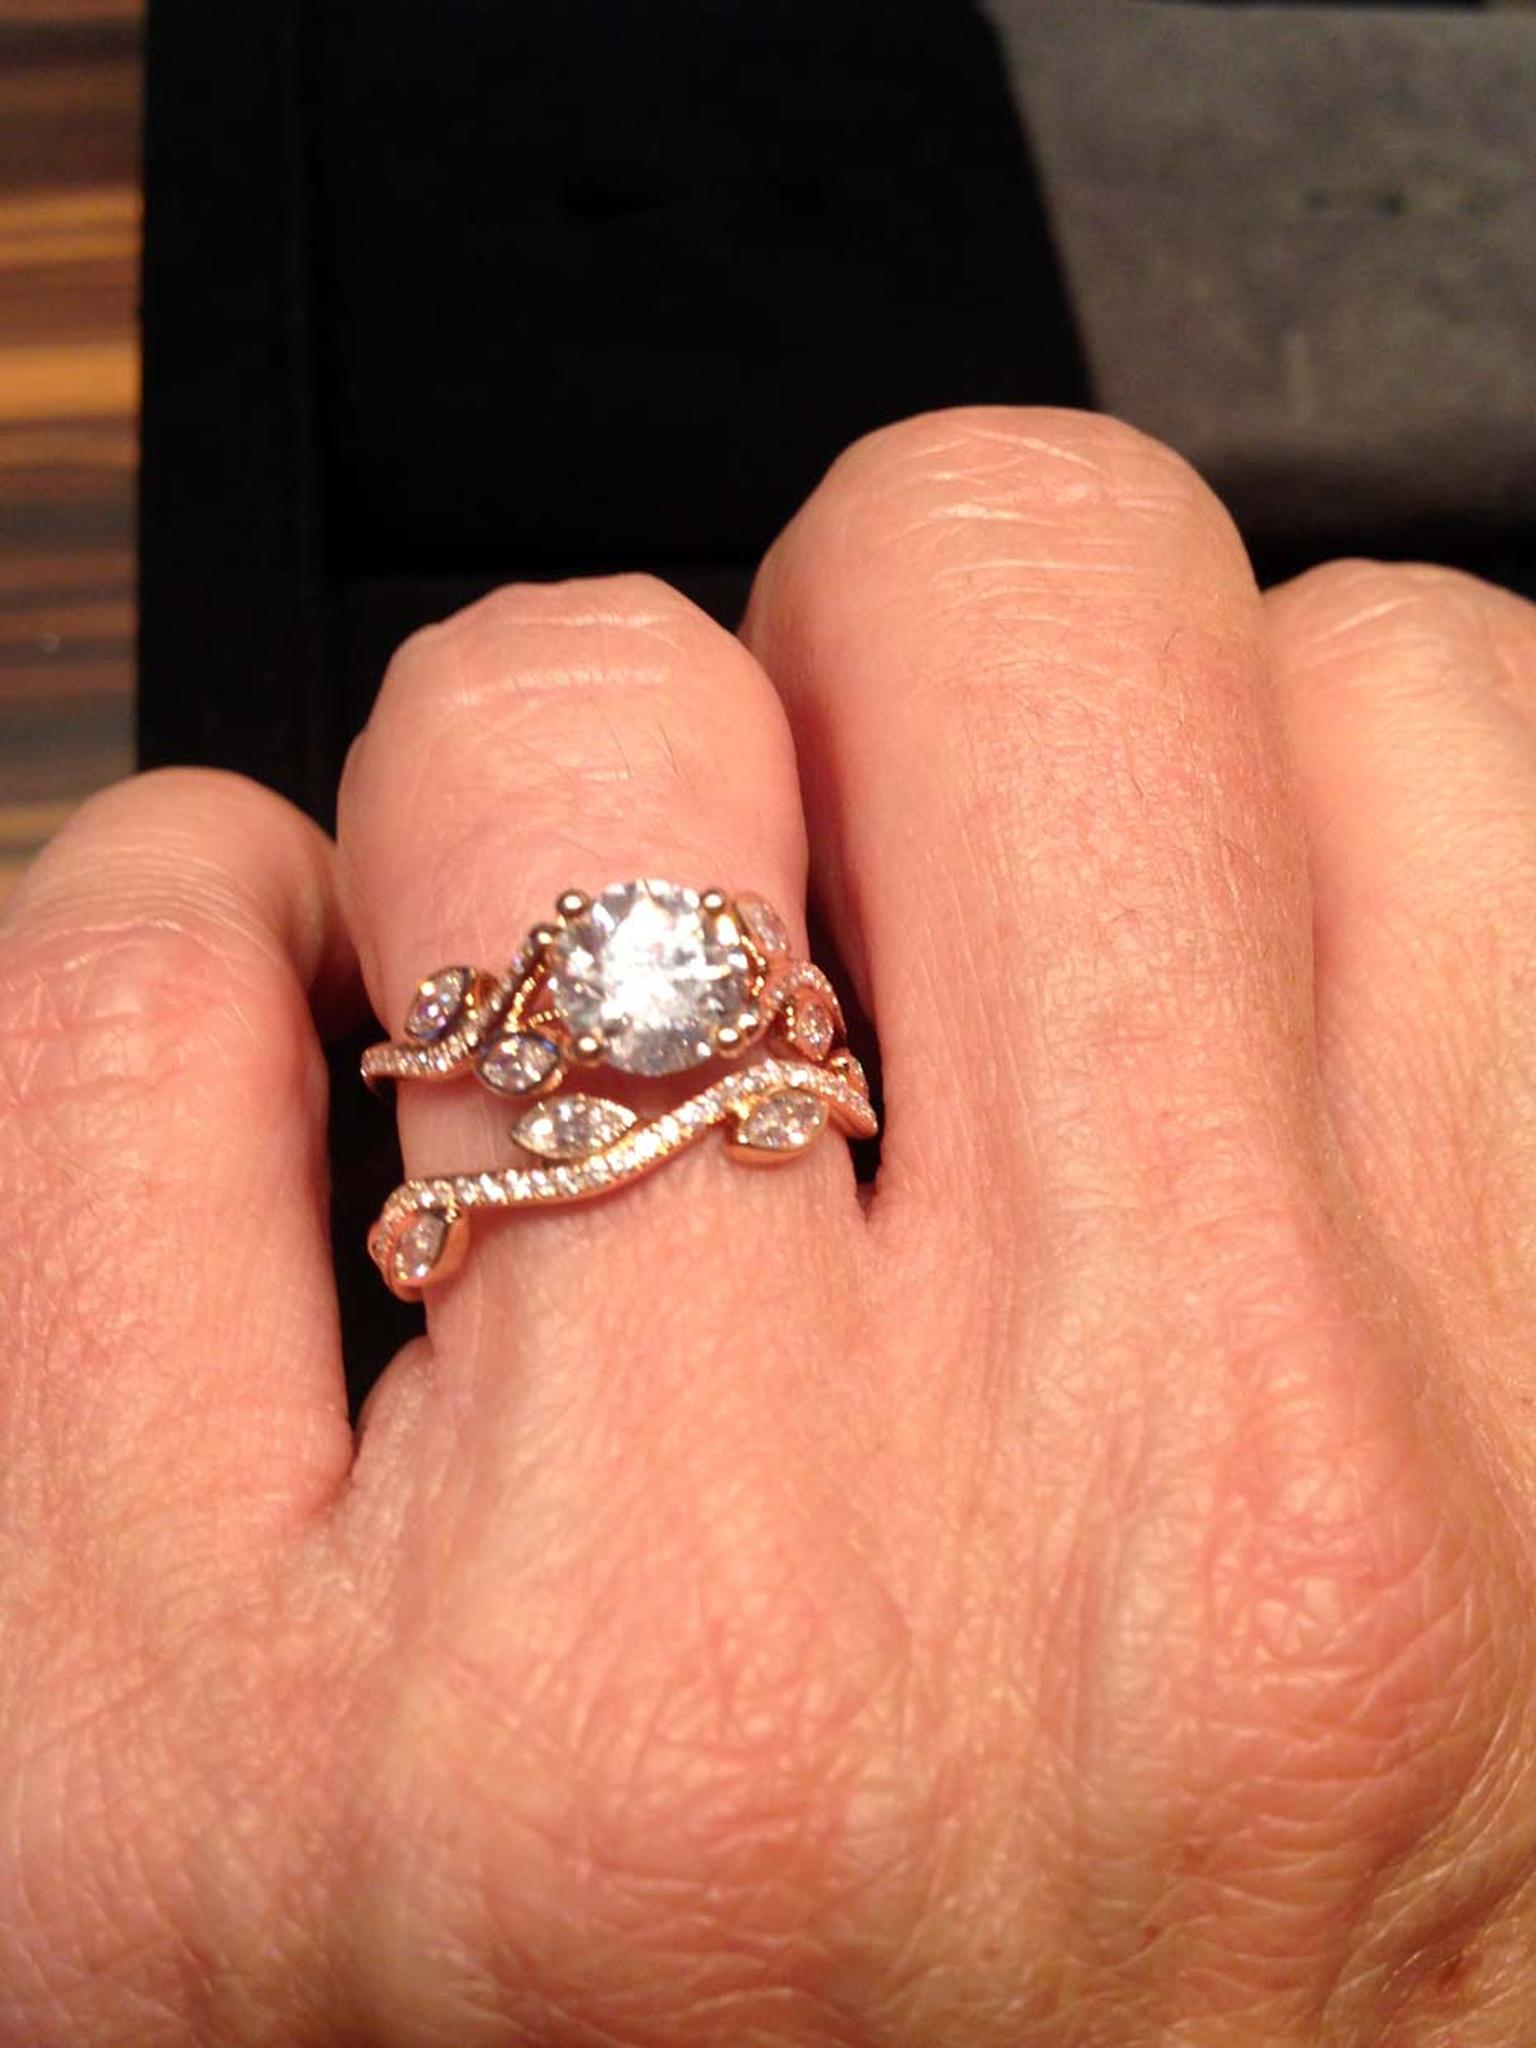 De Beers Adonis Rose solitaire diamond engagement ring in rose gold with matching diamond wedding band.